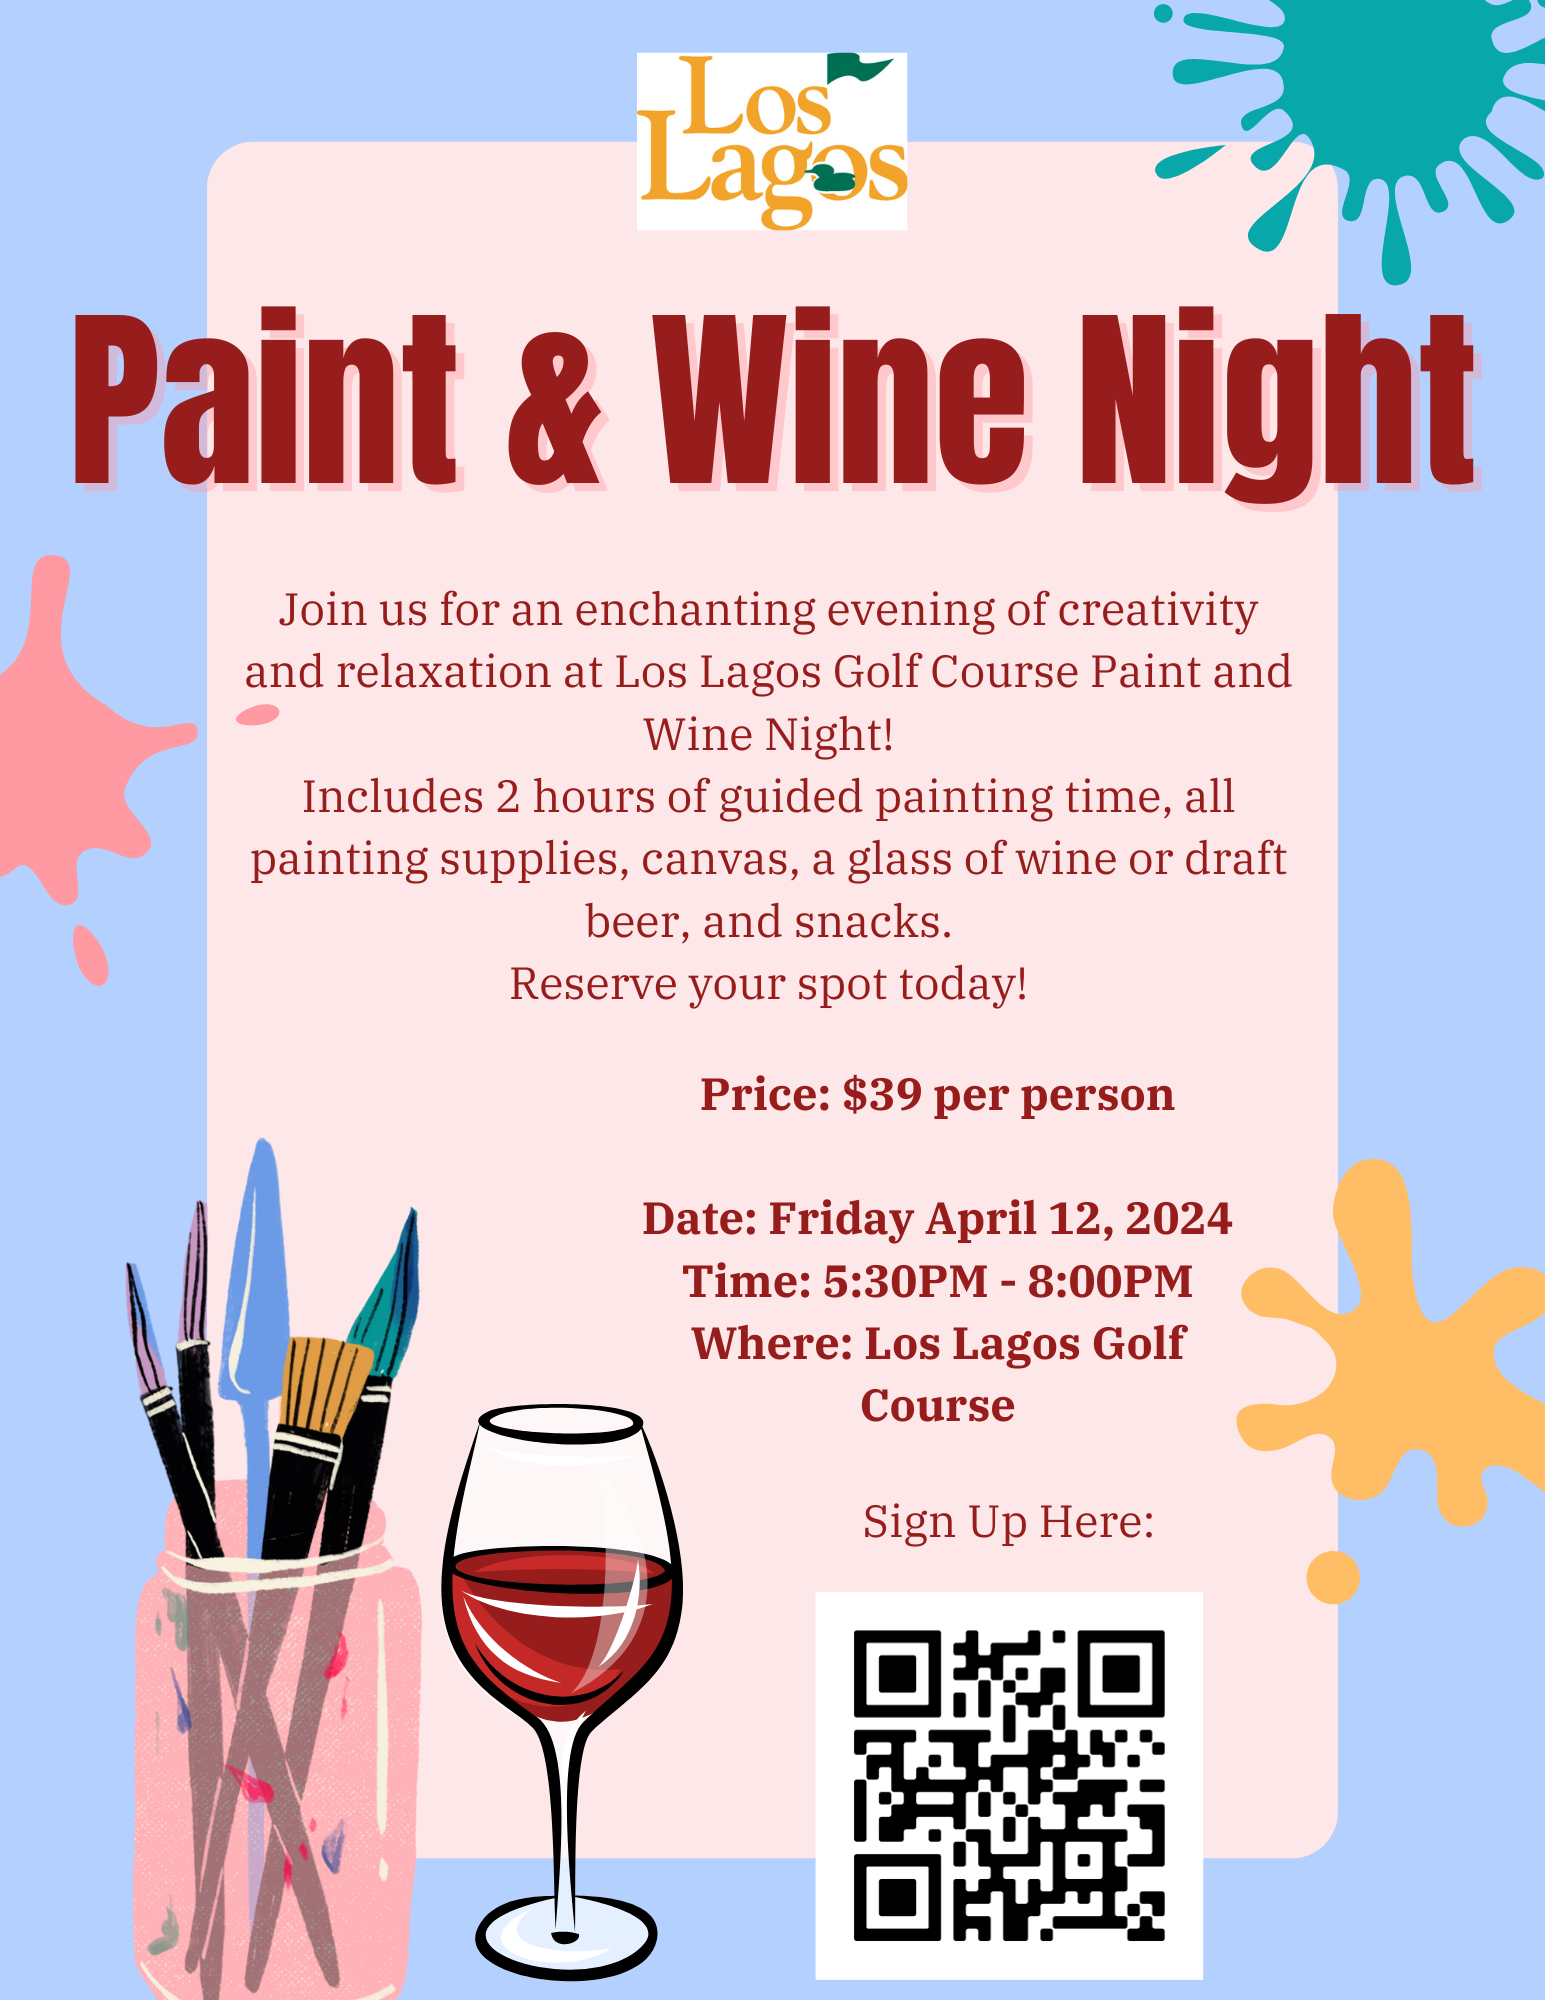 Paint and Wine Night Los Lagos Flyer 8.5 x 11 in